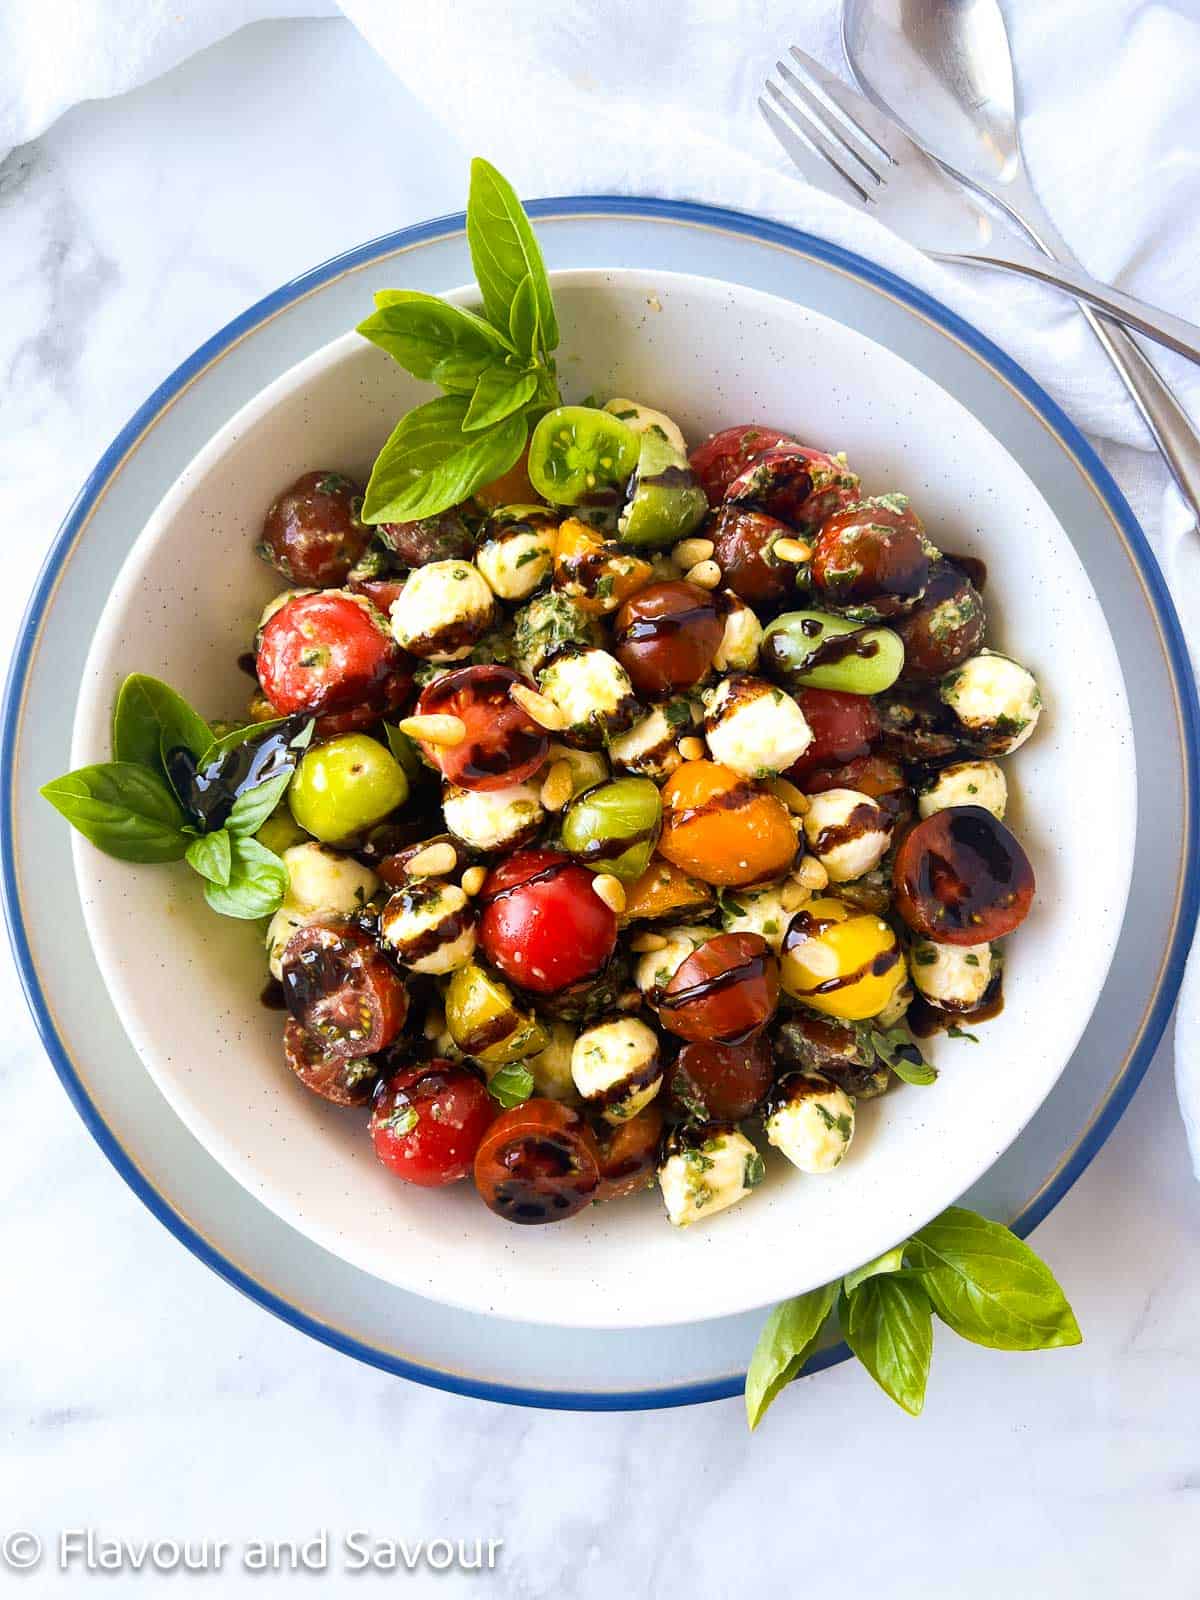 Easy Pesto Caprese Salad with Cherry Tomatoes drizzled with balsamic glaze and garnished with fresh basil leaves and pine nuts.